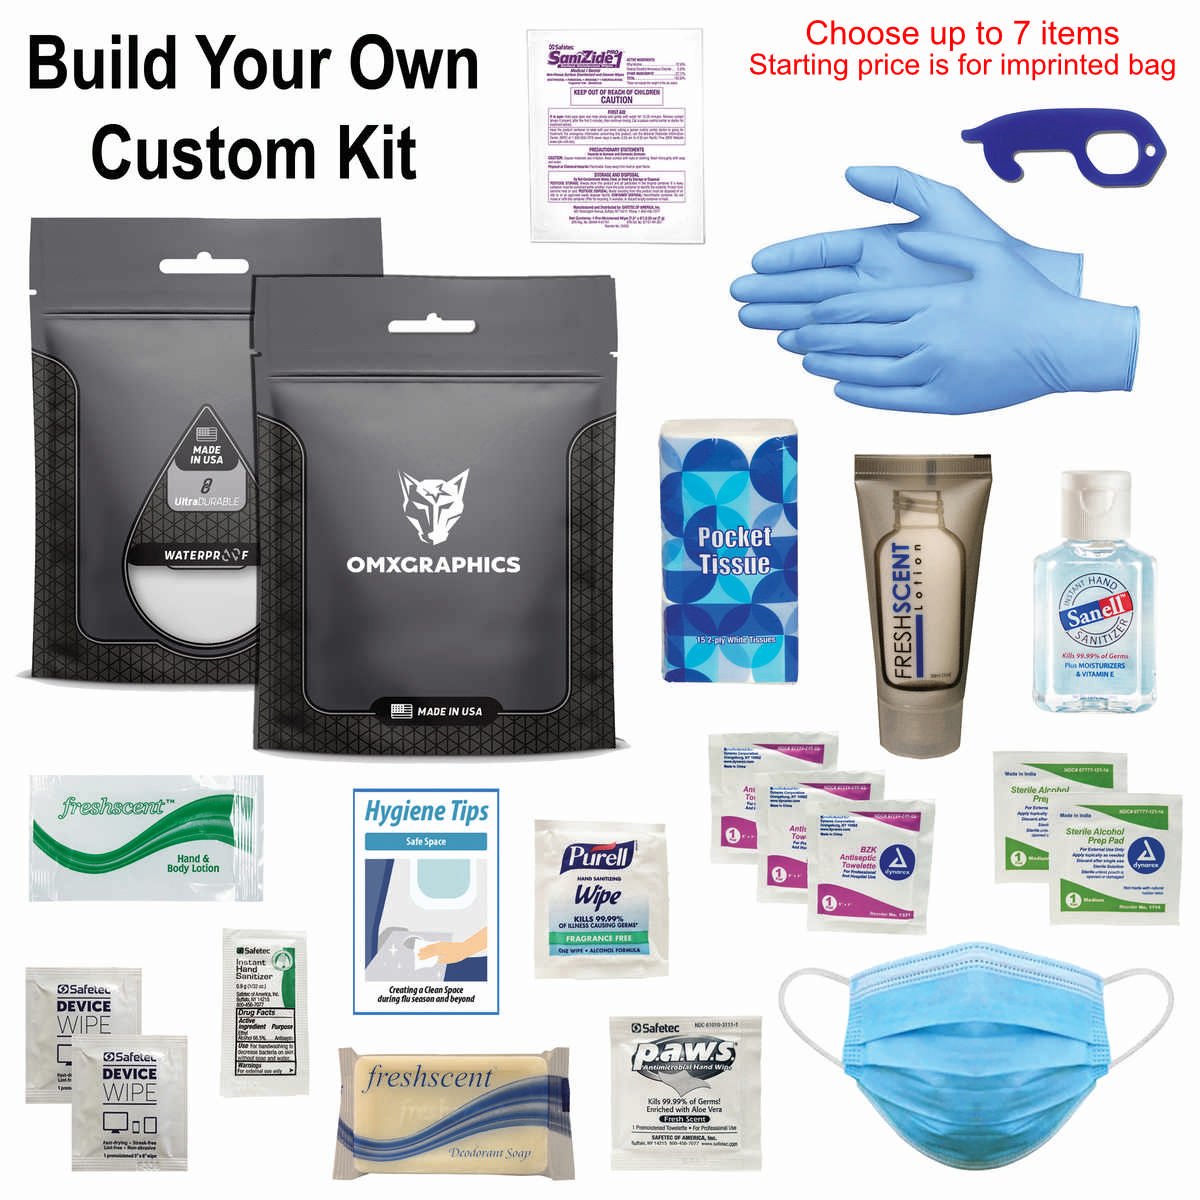 Build Your Own PPE Kit 2.0